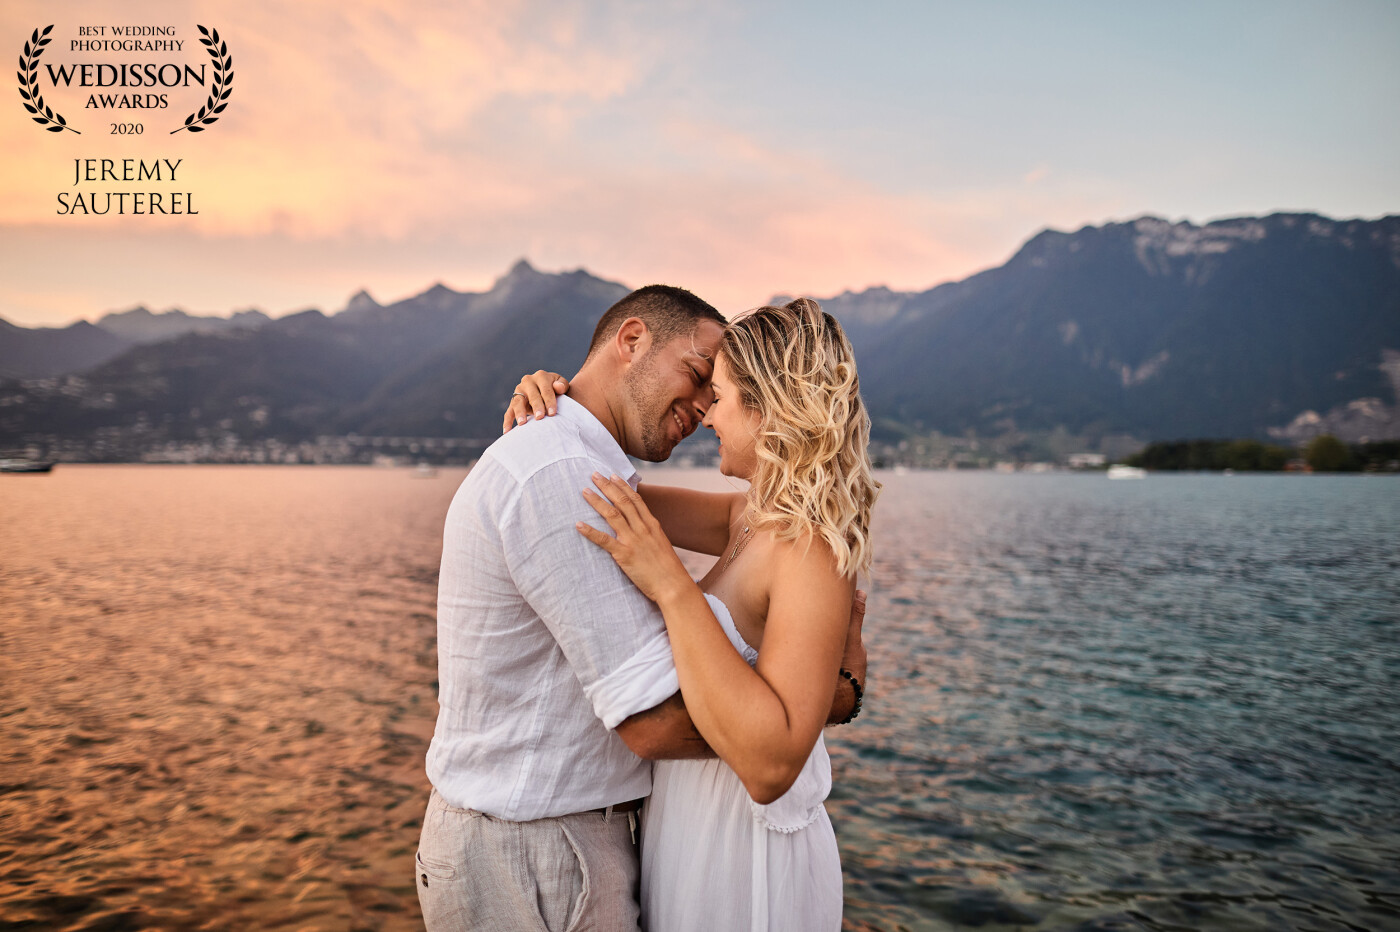 During an engagement session, we took advantage of a splendid sunset to take some photos on the shores of Lake Geneva. The moment before the kiss is I think one of the most beautiful!